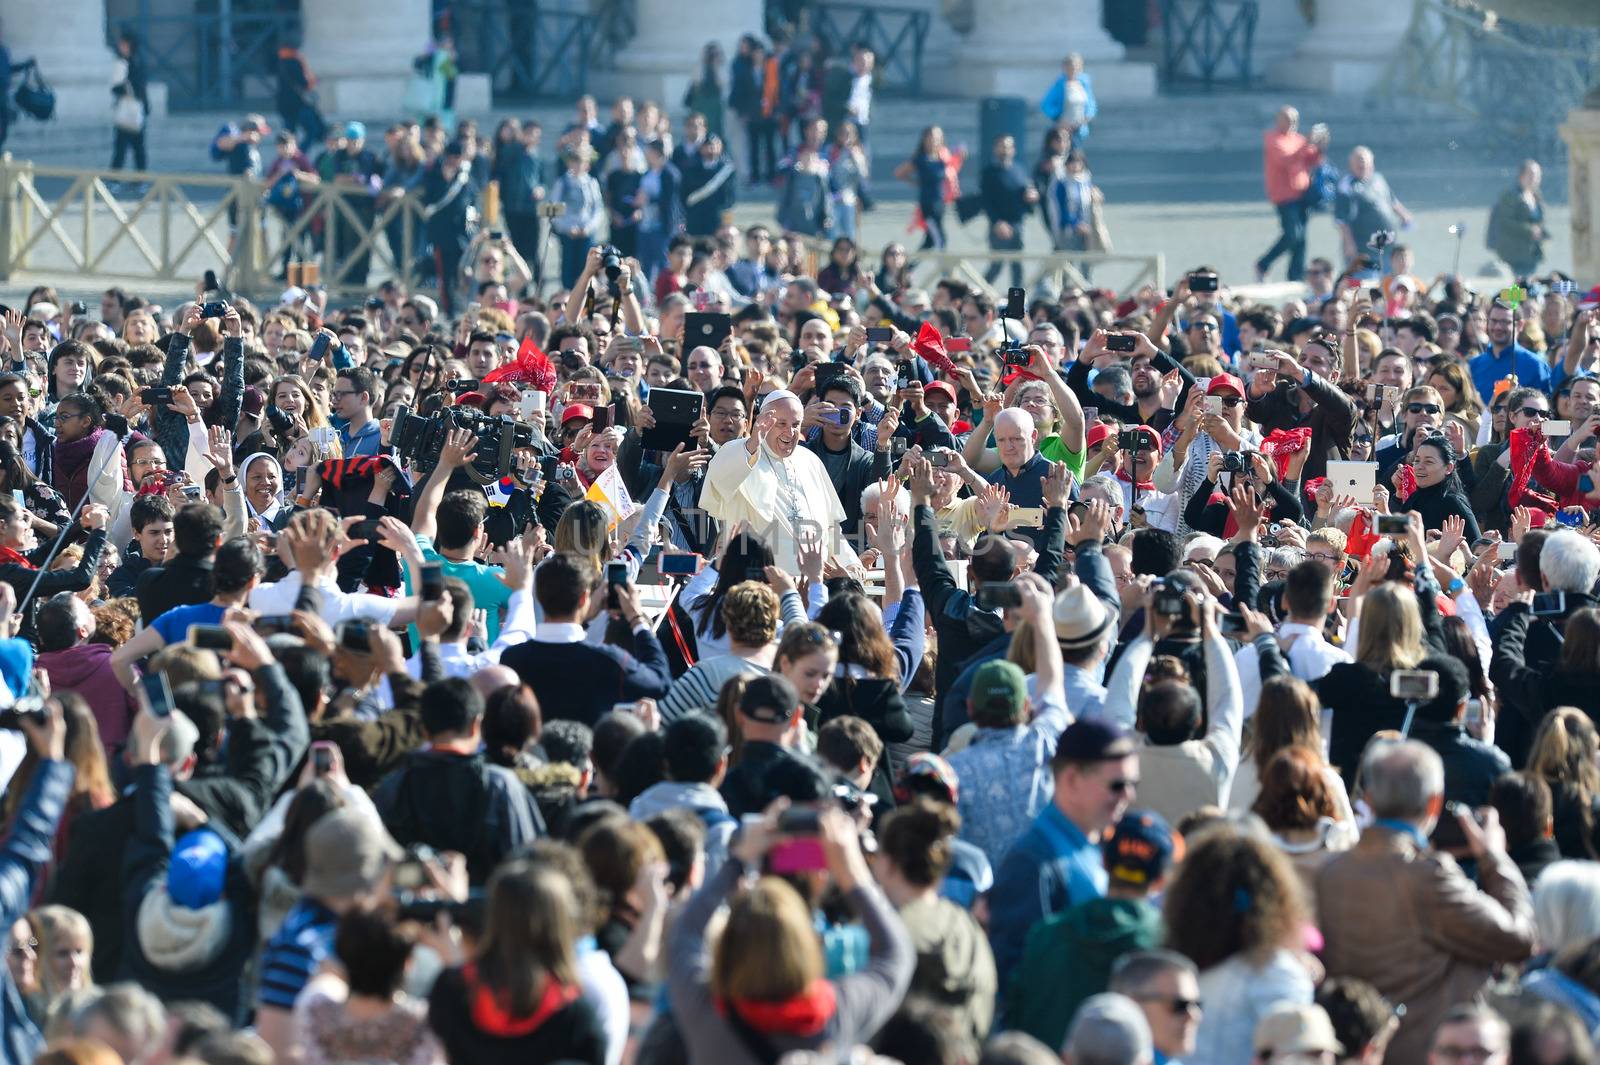 VATICAN: Pope Francis greets the crowd from the popemobile during his weekly general audience at St Peter's square on March 30, 2016, at the Vatican.